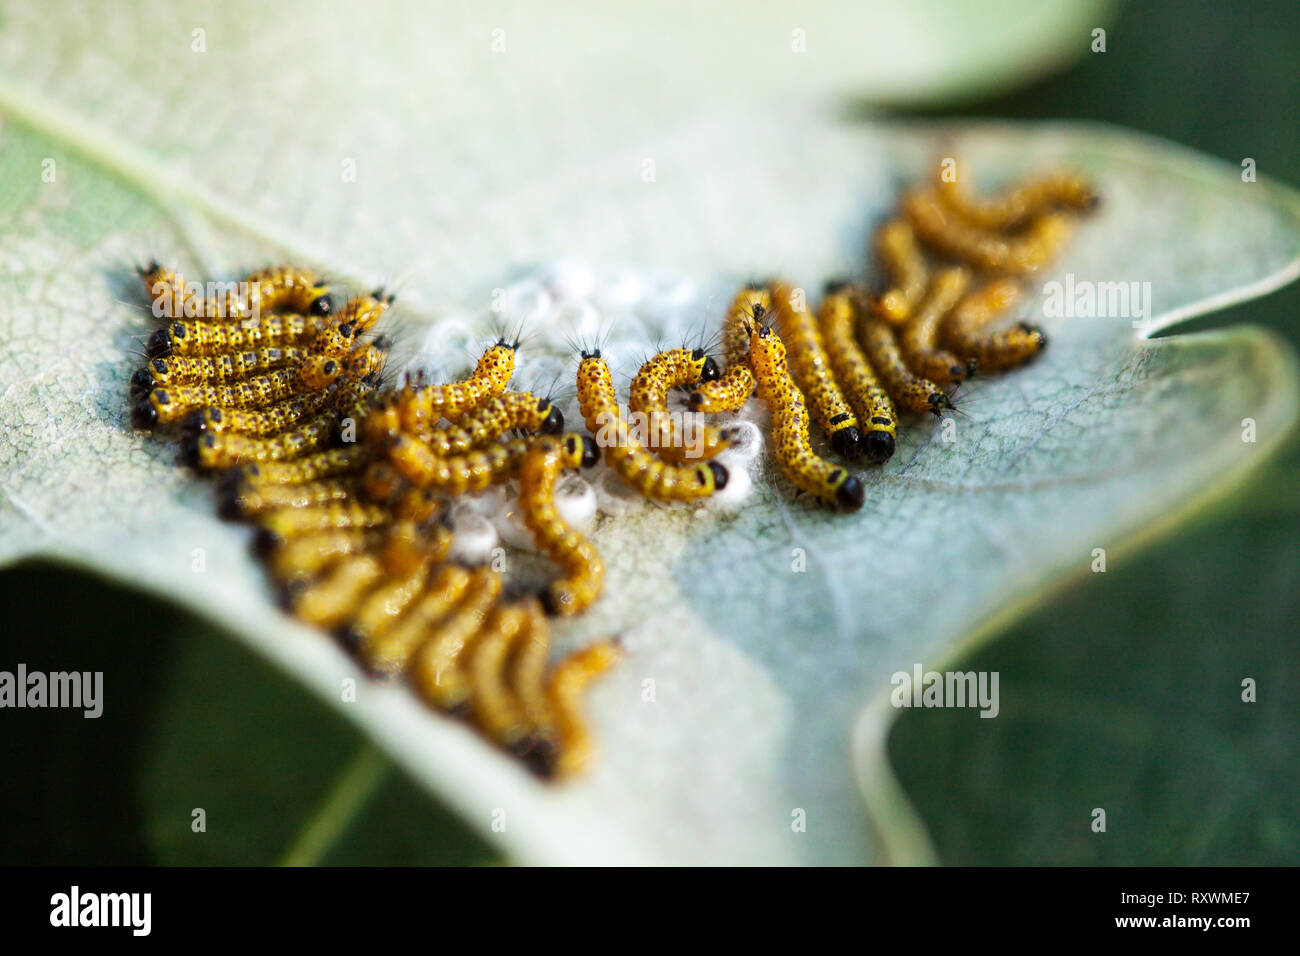 On the leaf hatched caterpillars Stock Photo